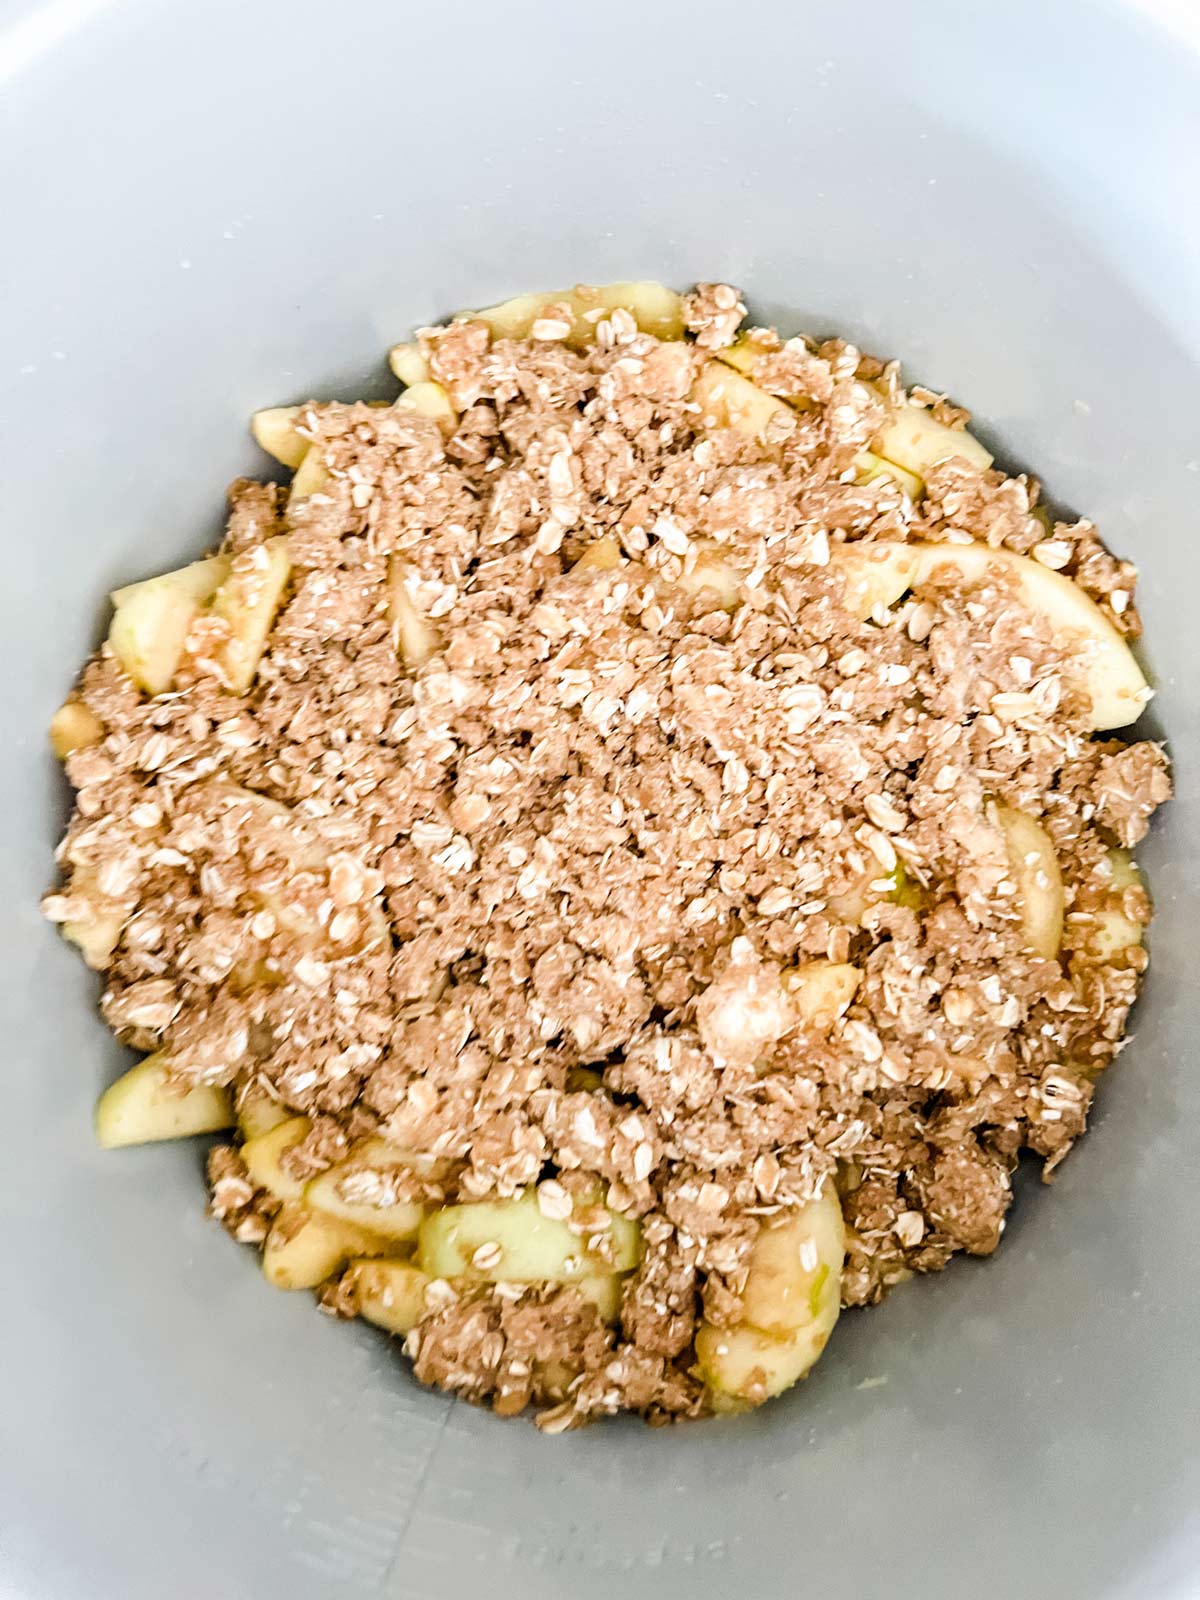 Sauteed apples with a crumble topping ready to cook in a Ninja Foodi.